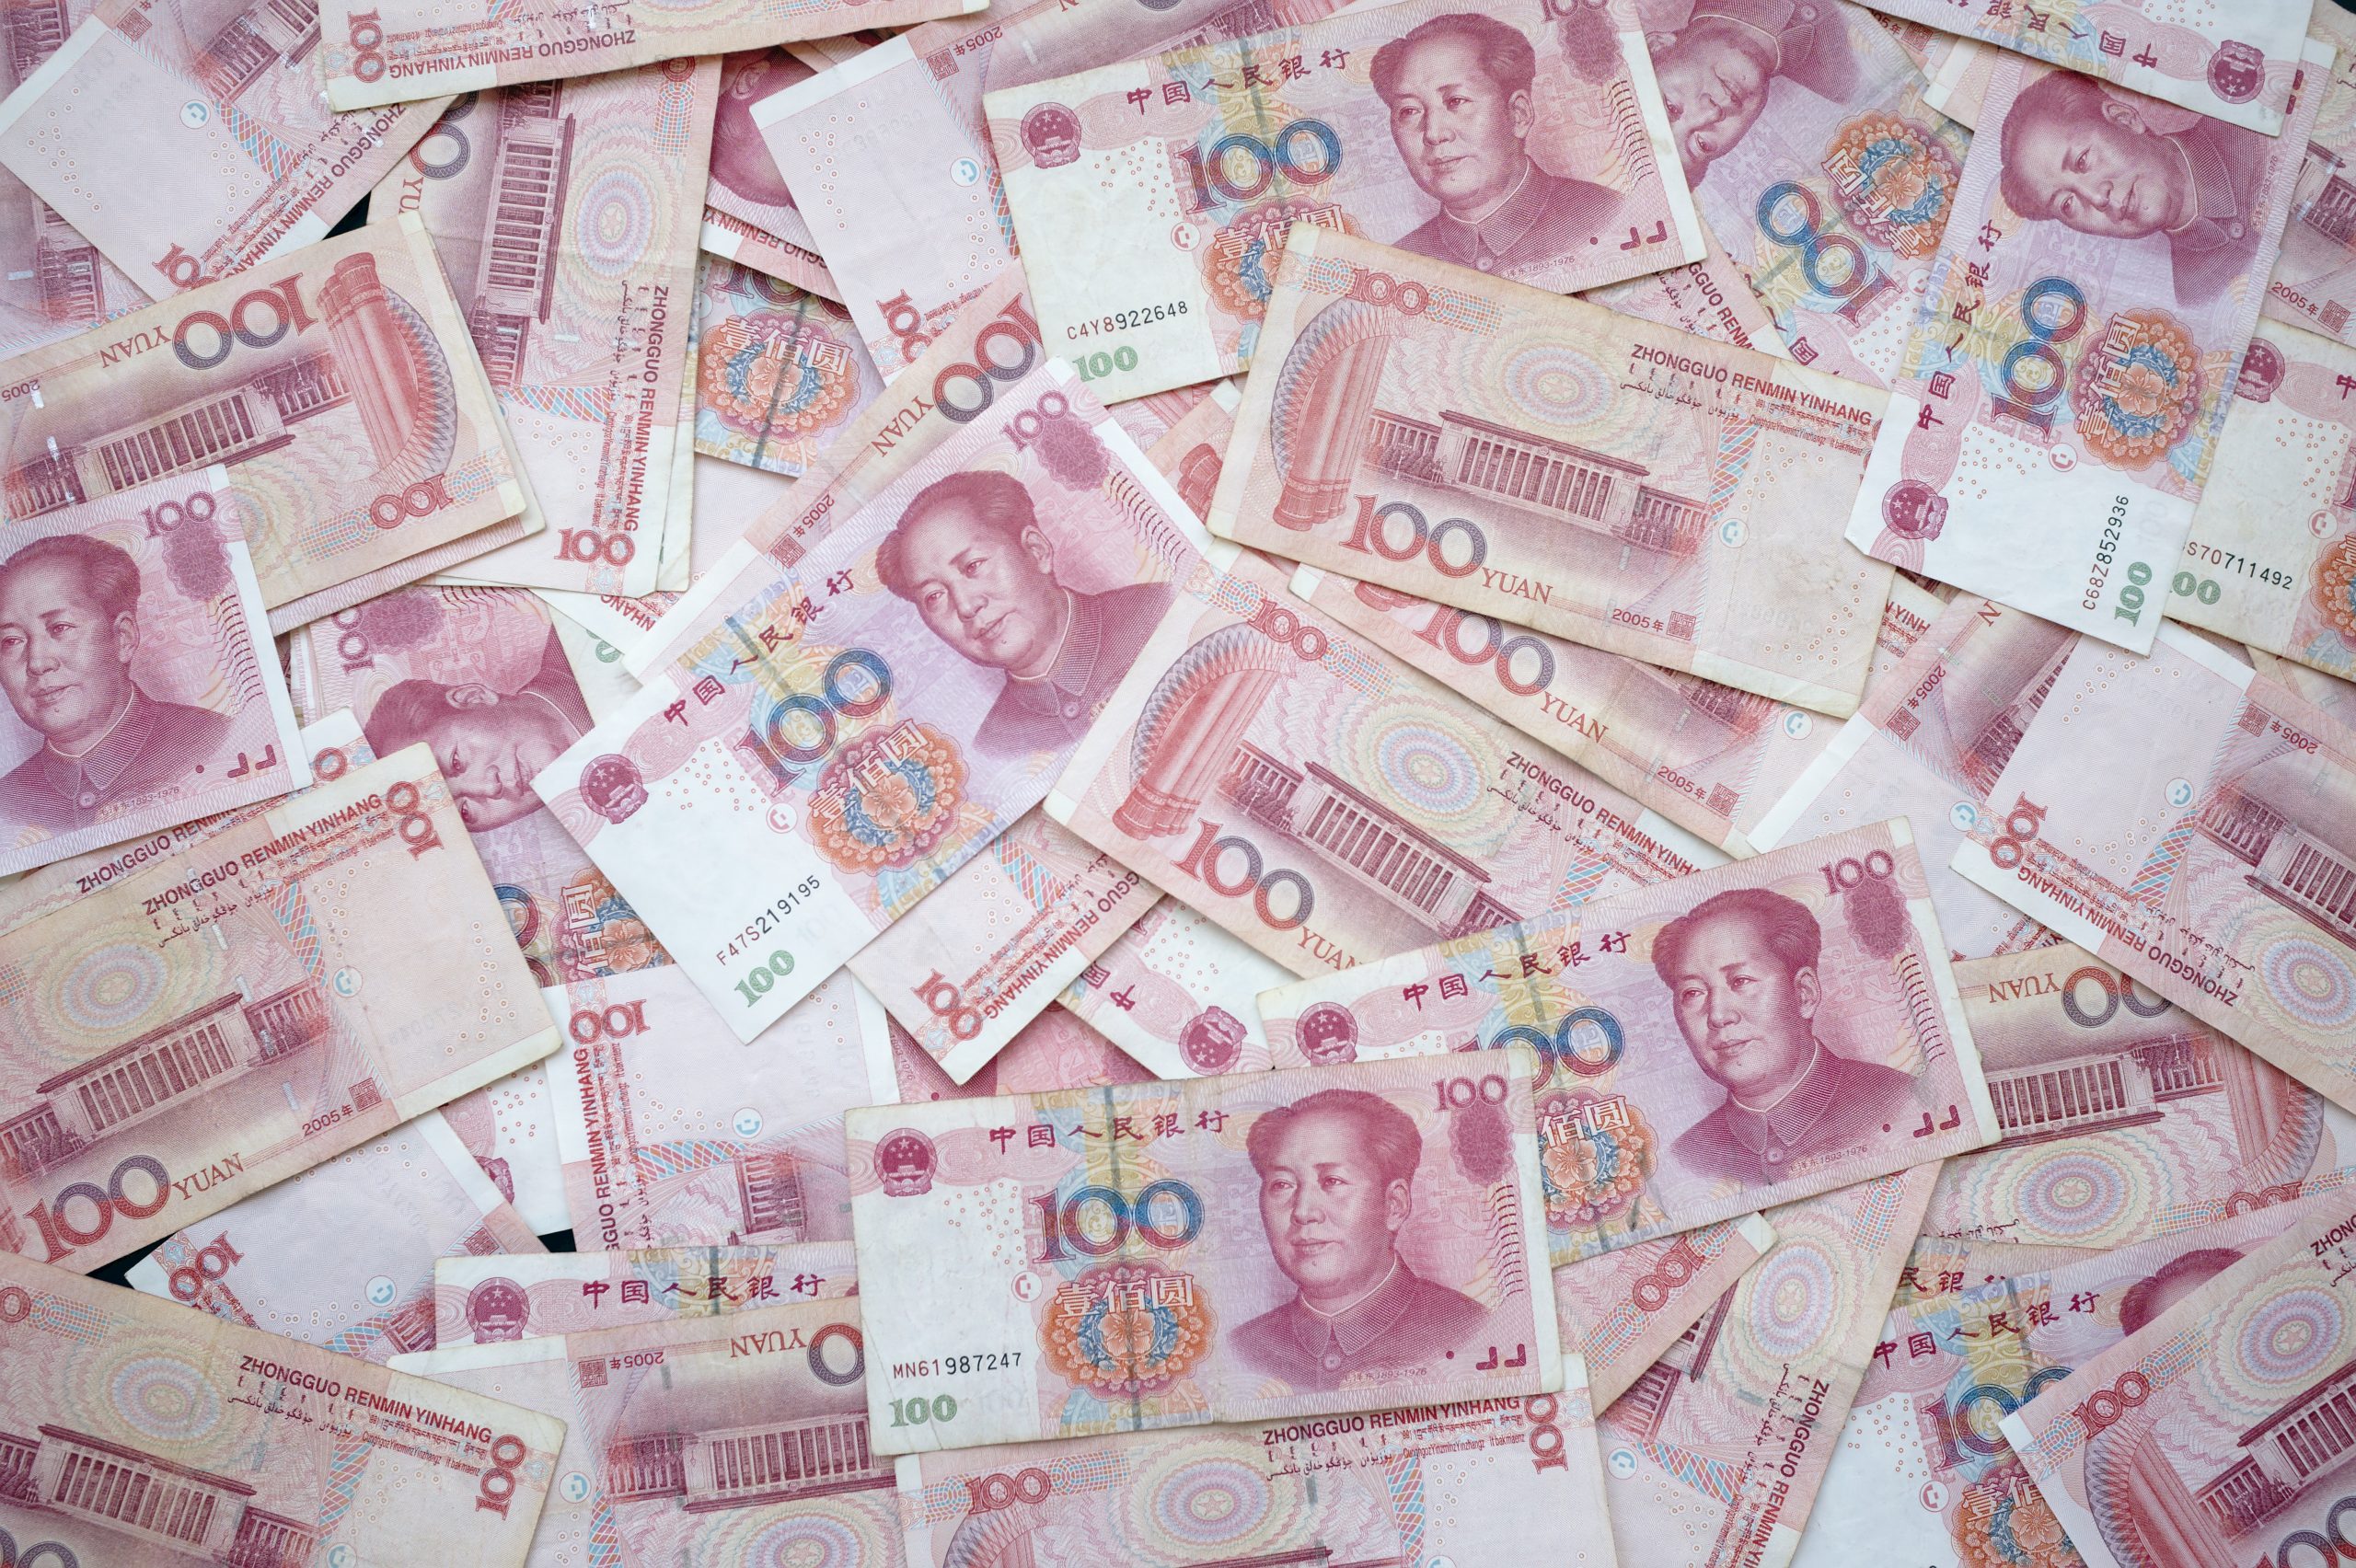 28 IPOs in 180 days, a trillion dollar market has exploded in China